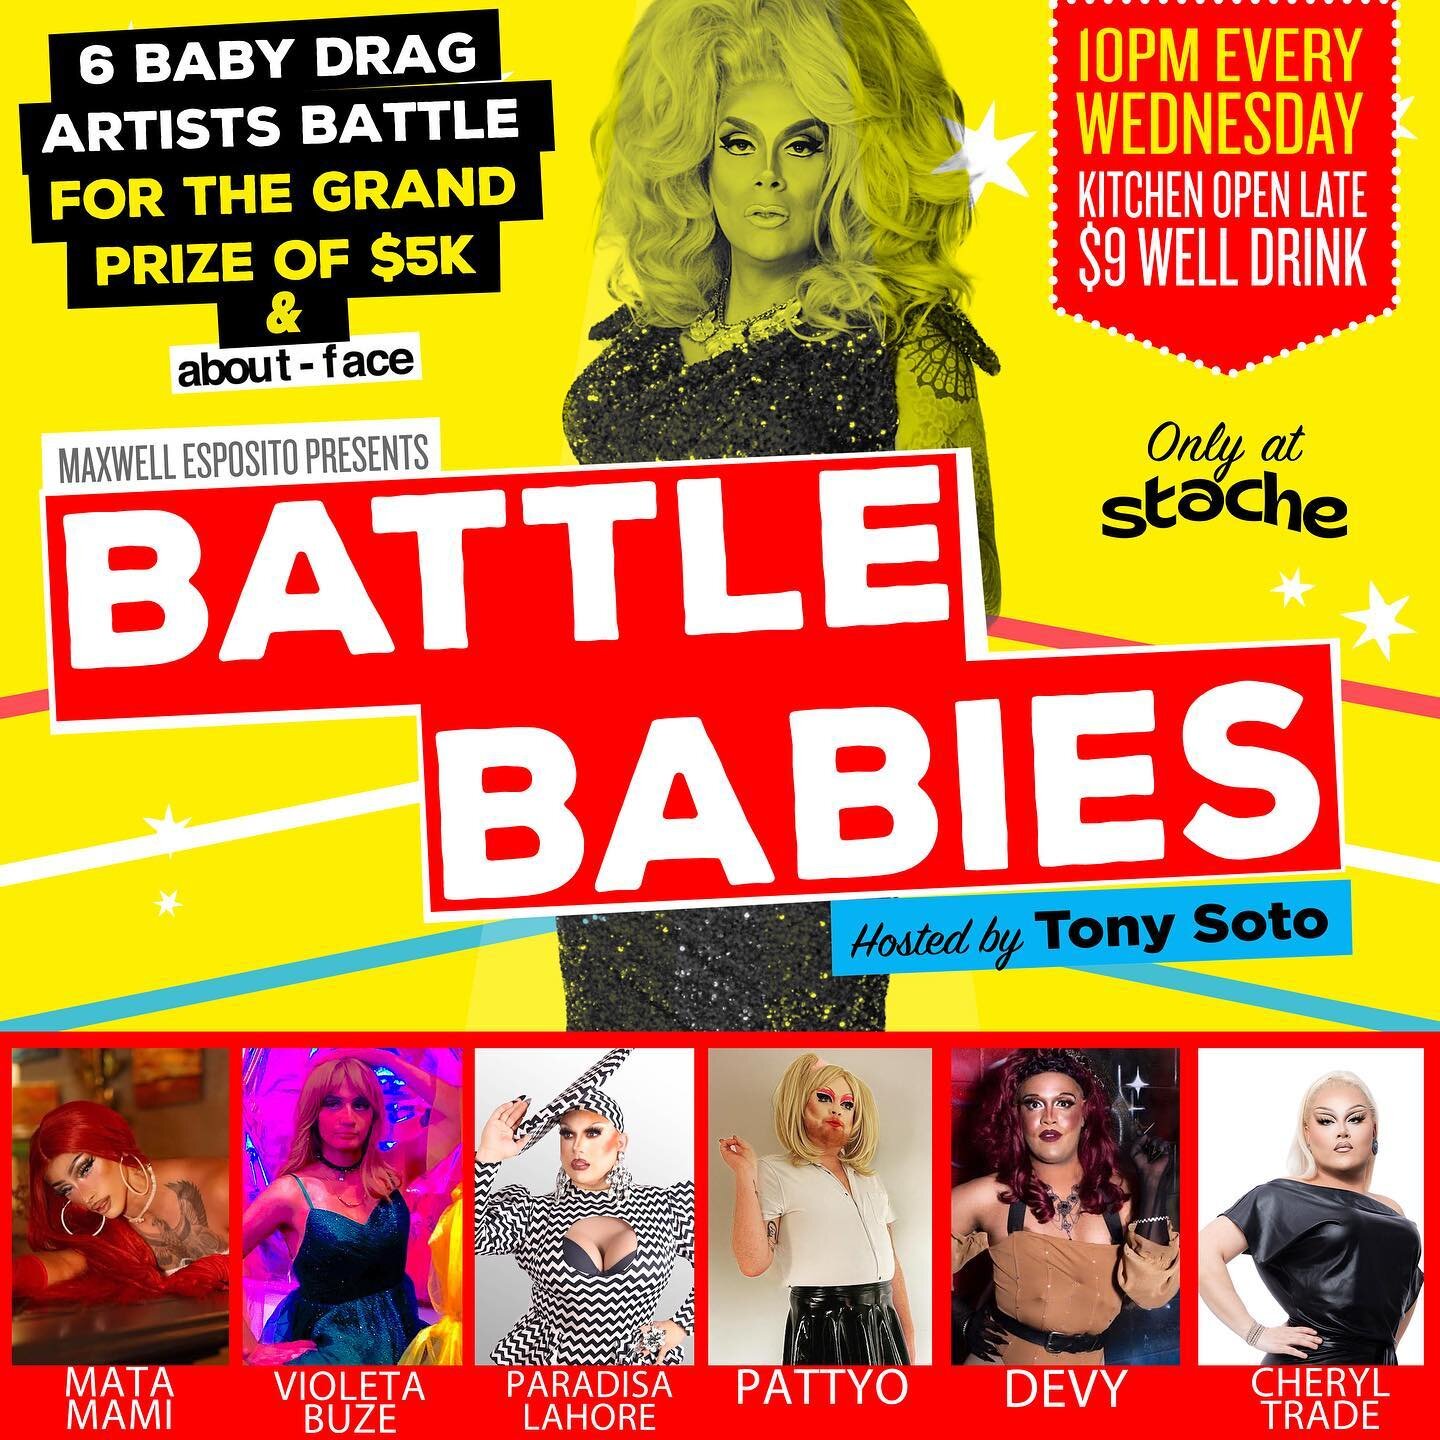 Next Wednesday a fresh batch of babies will battle it out for a spot in our Semi-Final! Join your hostess @thetonysotoshow for #battlebabies at @stacheweho! Come see which of these babies will move on for a chance at $5,000